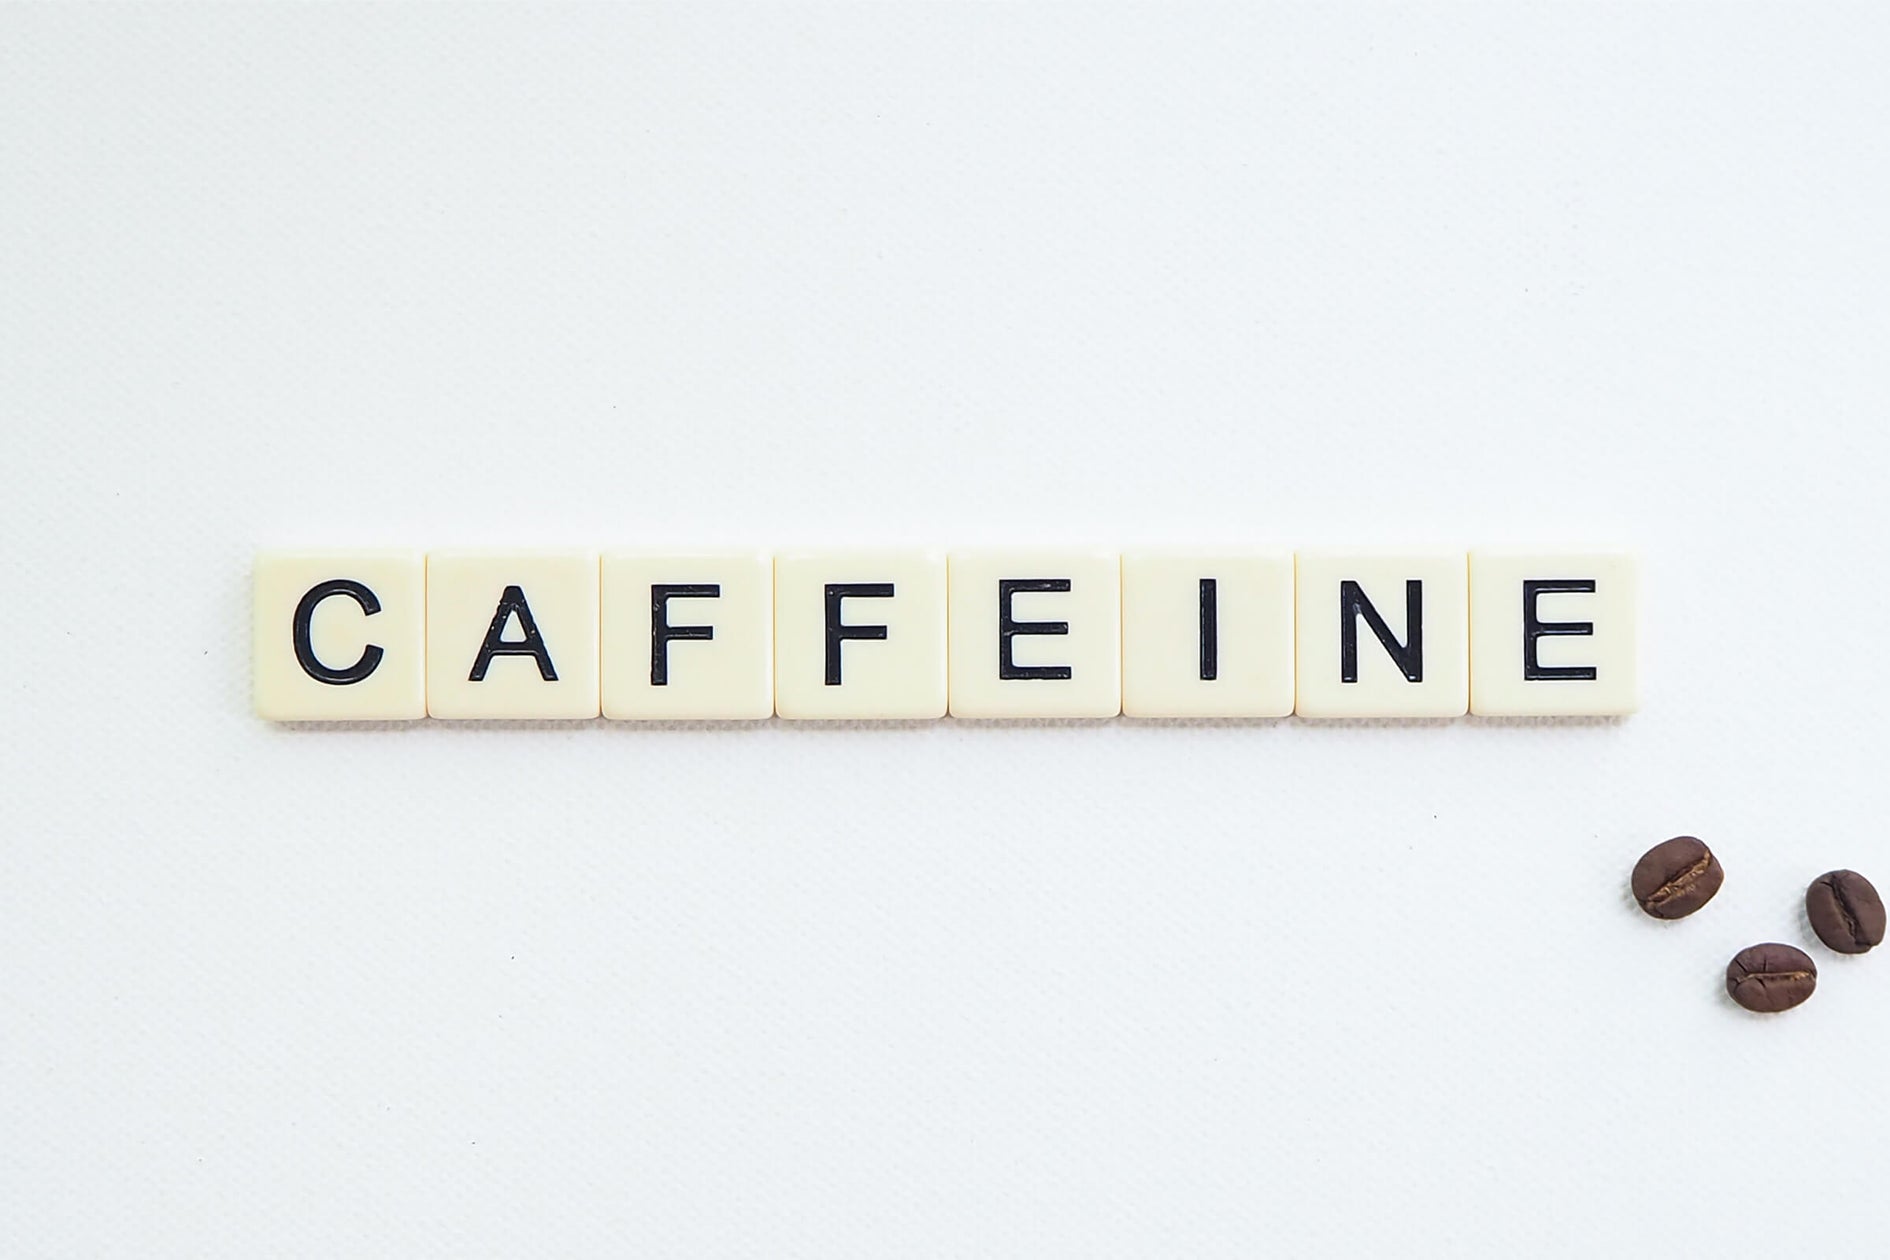 Does Caffeine Affect Your Memory?